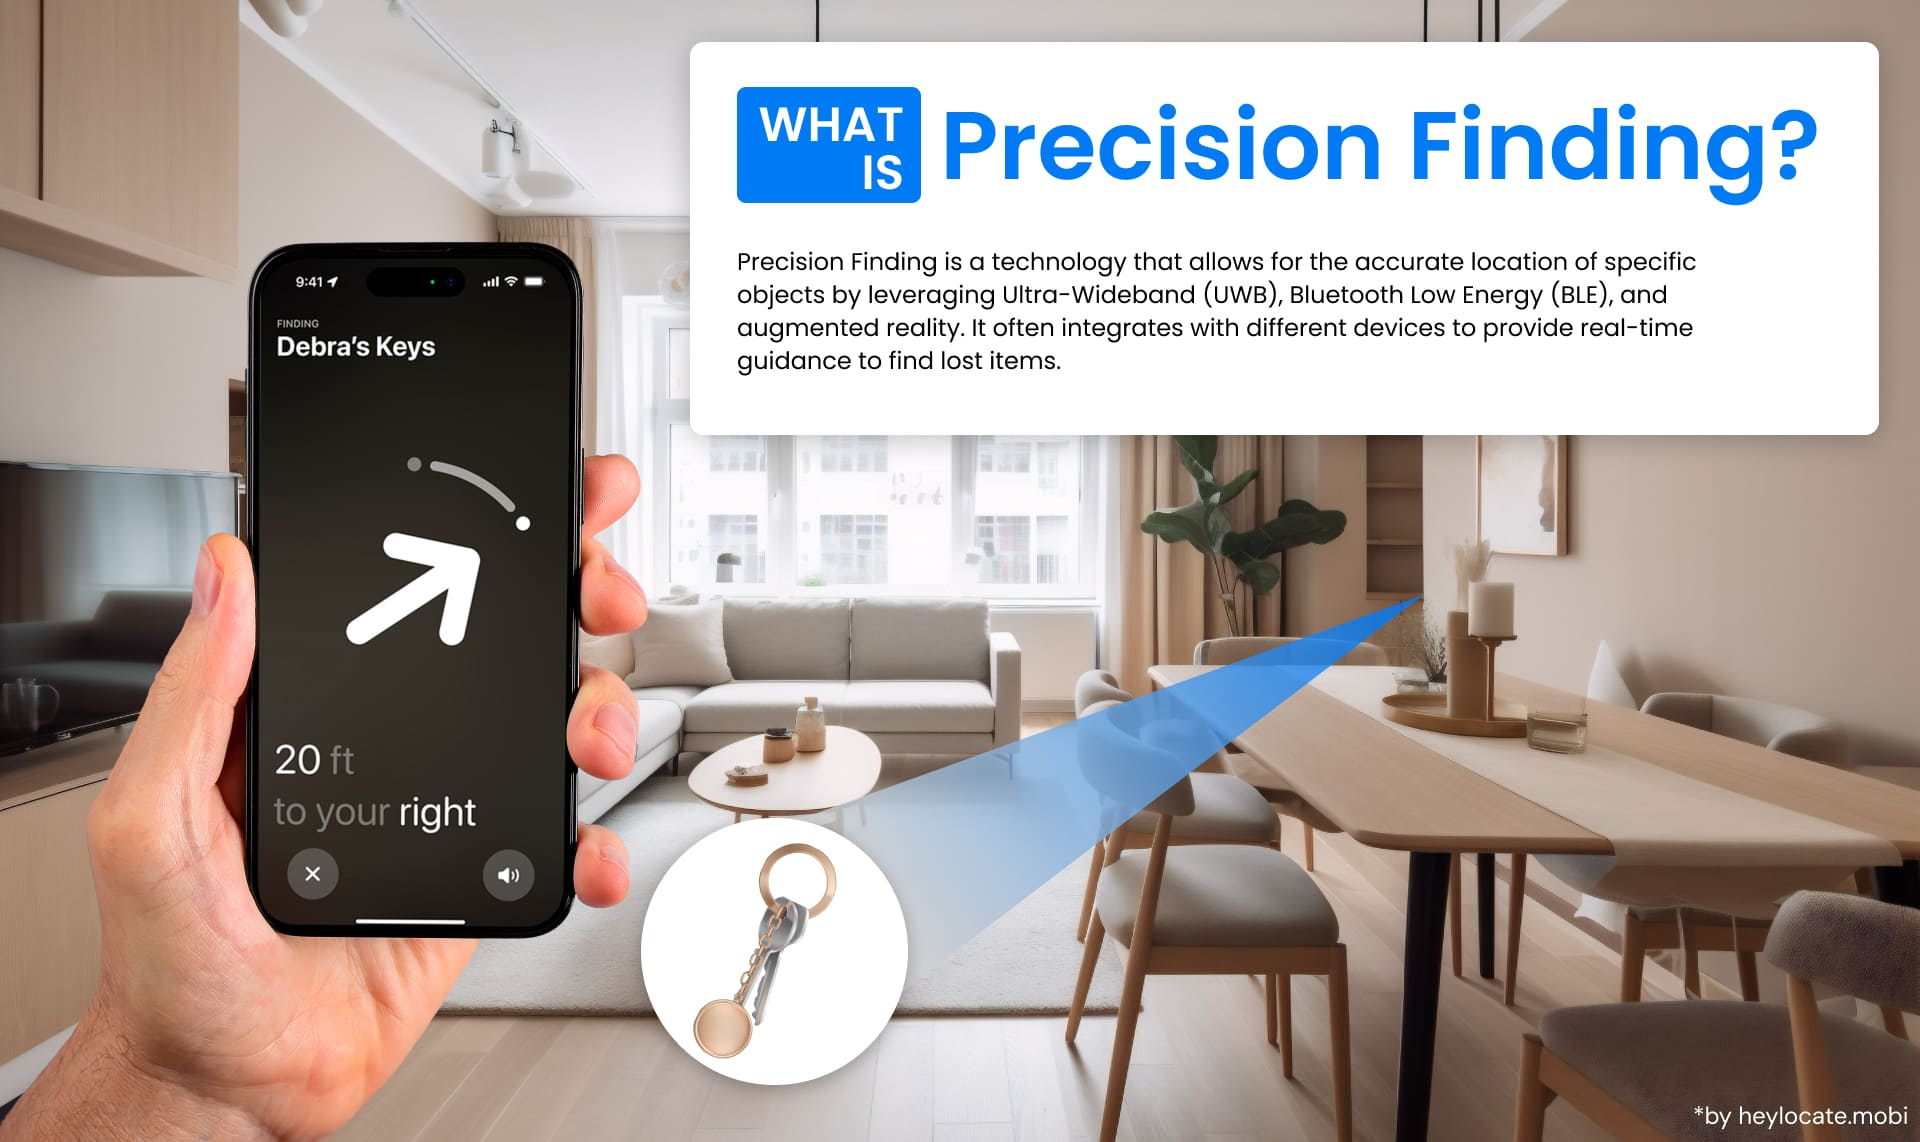 An image illustrating the concept of Precision Finding using a smartphone to locate a thing, for example, keys, highlighting the use of UWB and BLE technology.